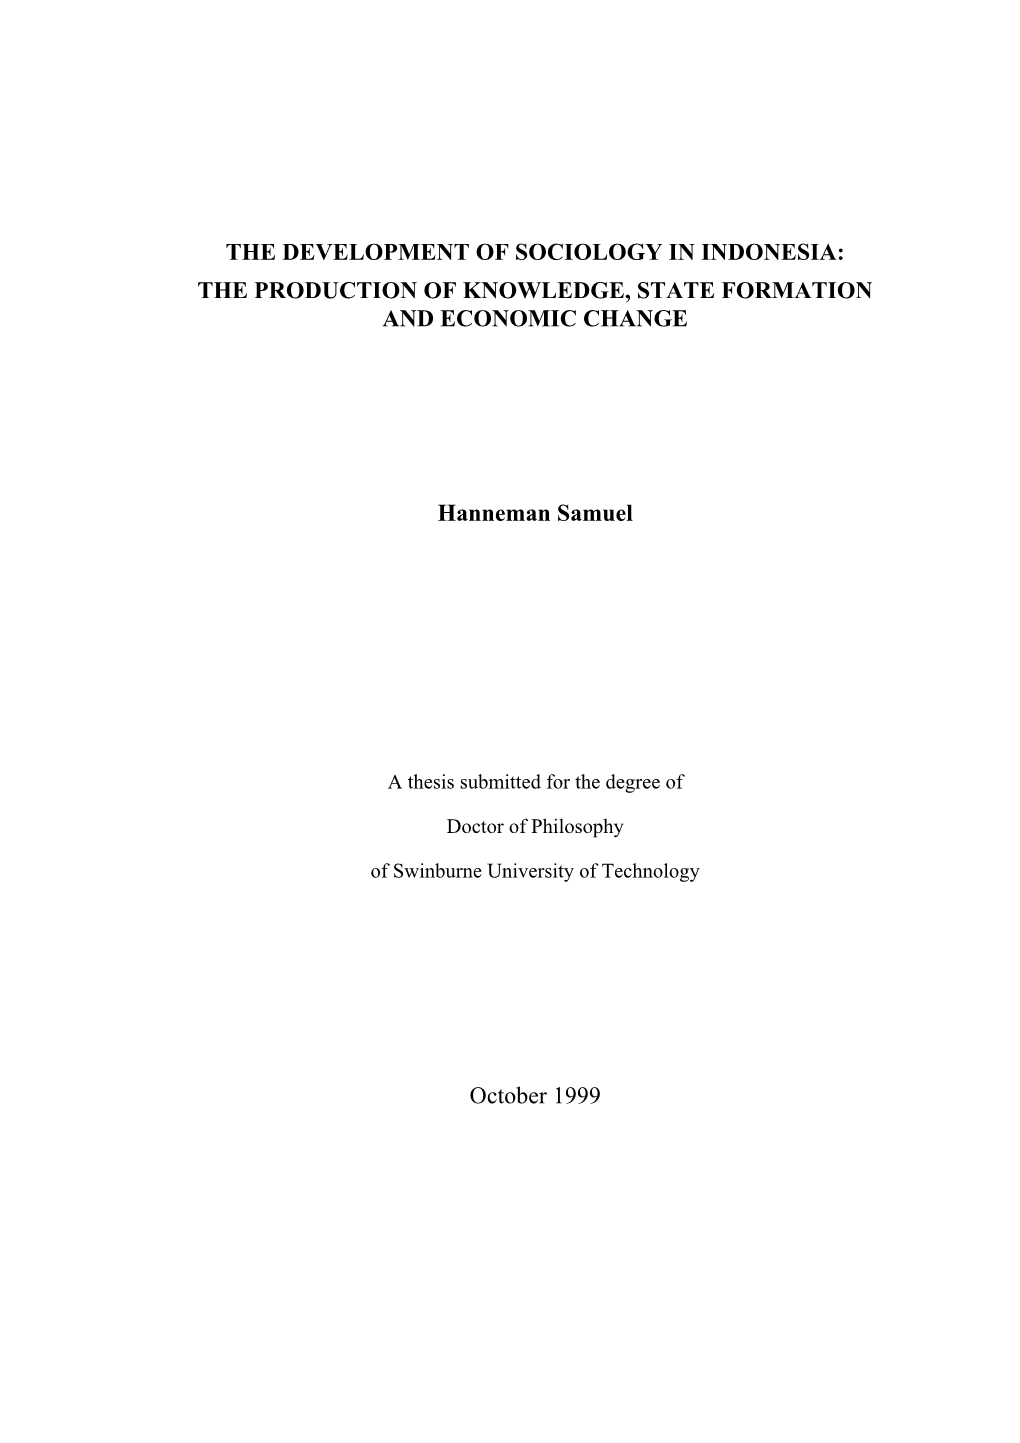 The Development of Sociology in Indonesia: the Production of Knowledge, State Formation and Economic Change